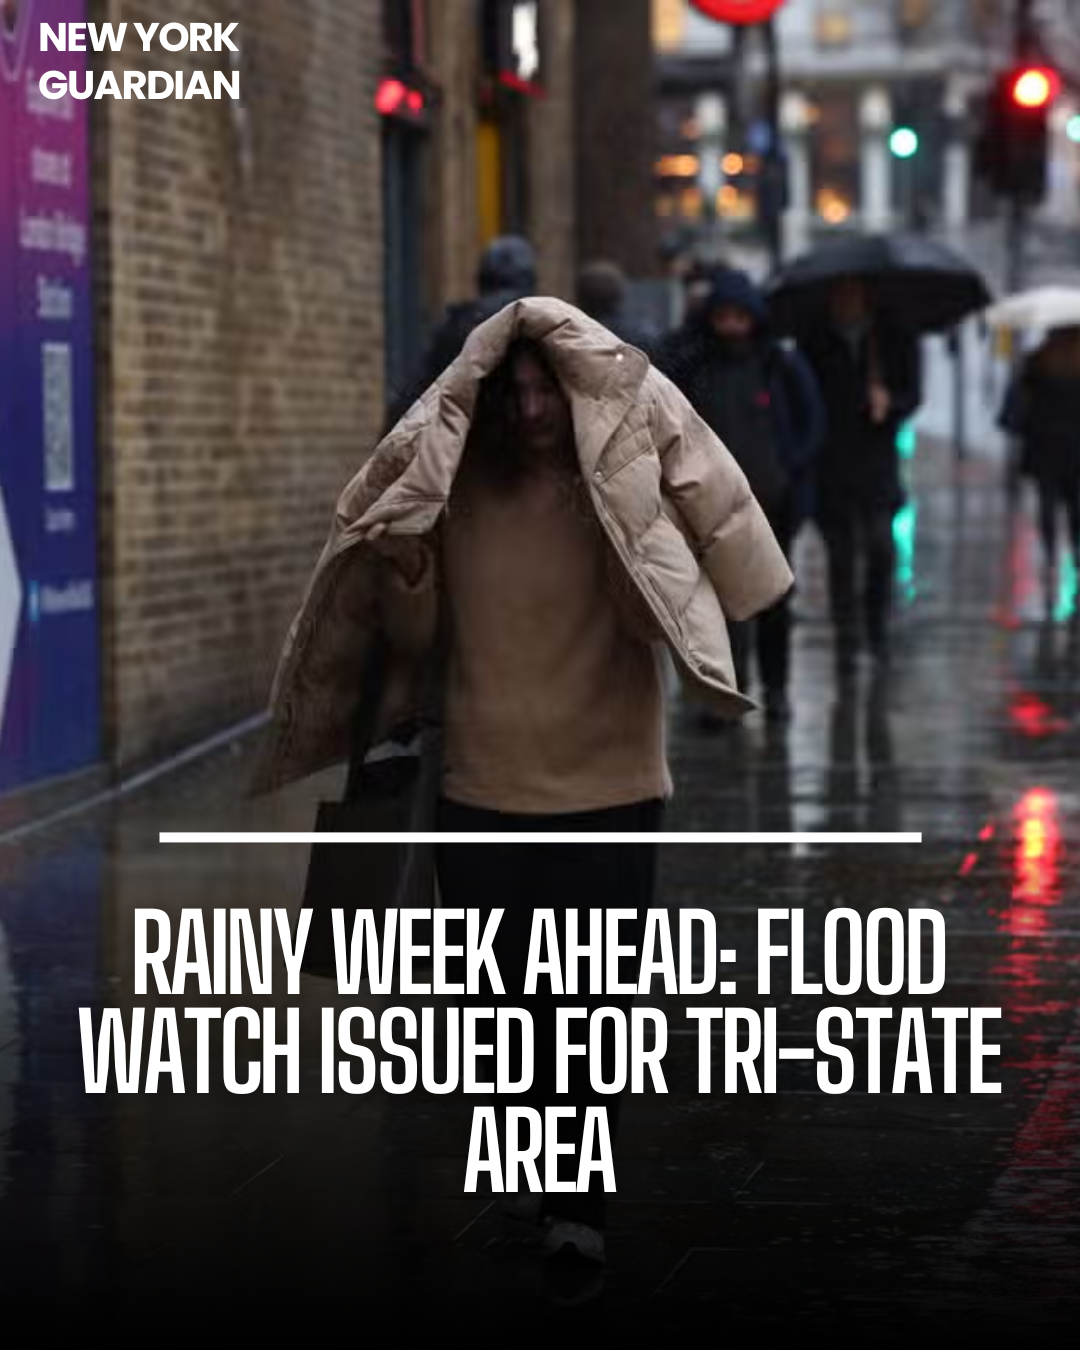 Following a small break in precipitation, the tri-state area is bracing for an extended period of rainy weather.